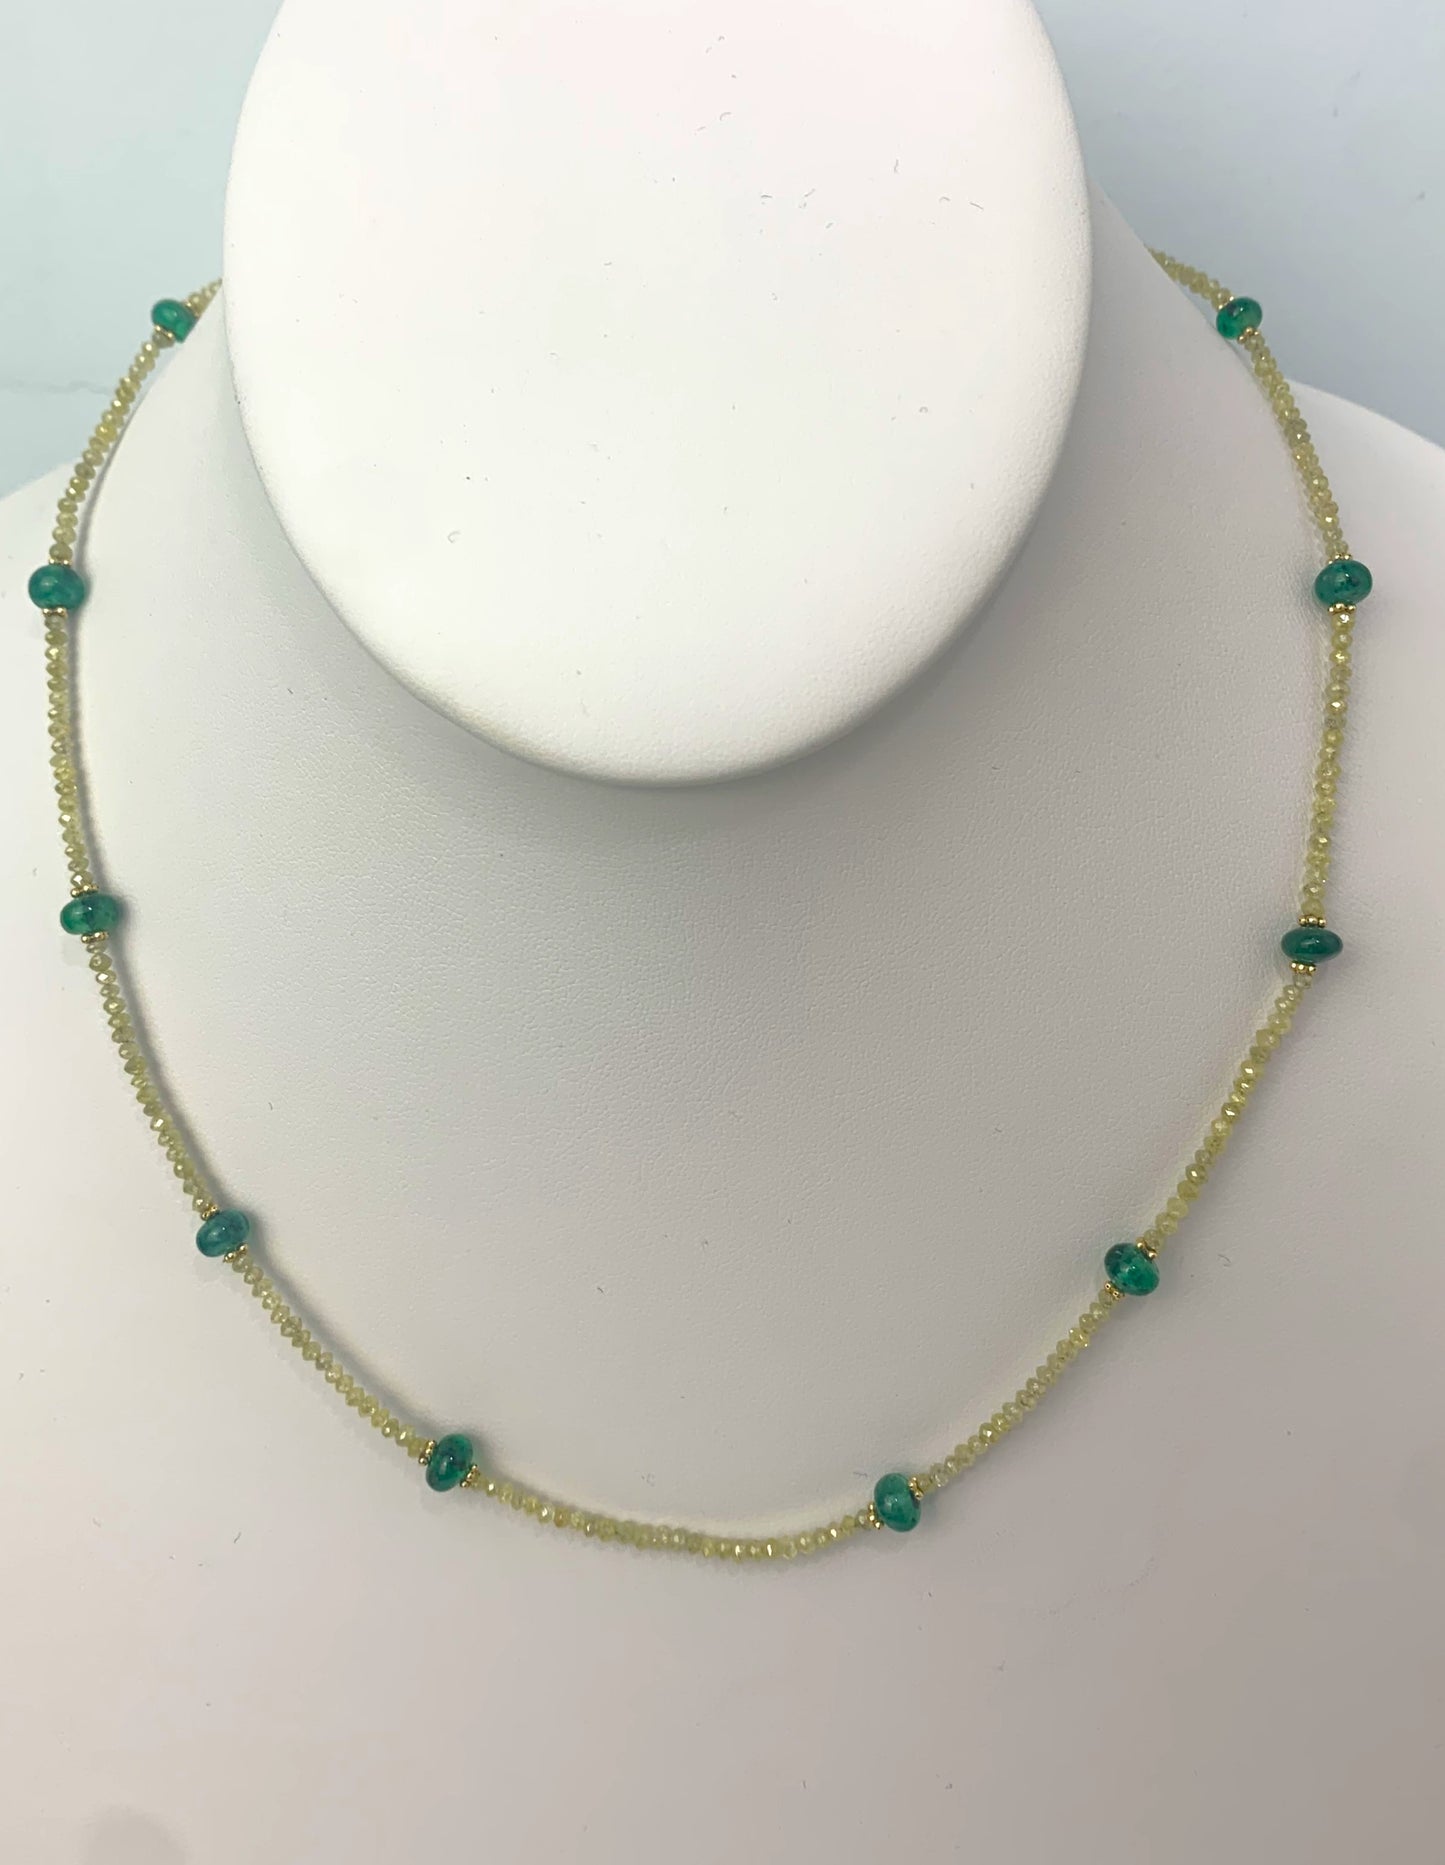 18" Yellow Diamond Emerald Bead Corded Necklace in 14KY - NCK-061-CRDDIAGM14Y-YLEM-18 12ctw